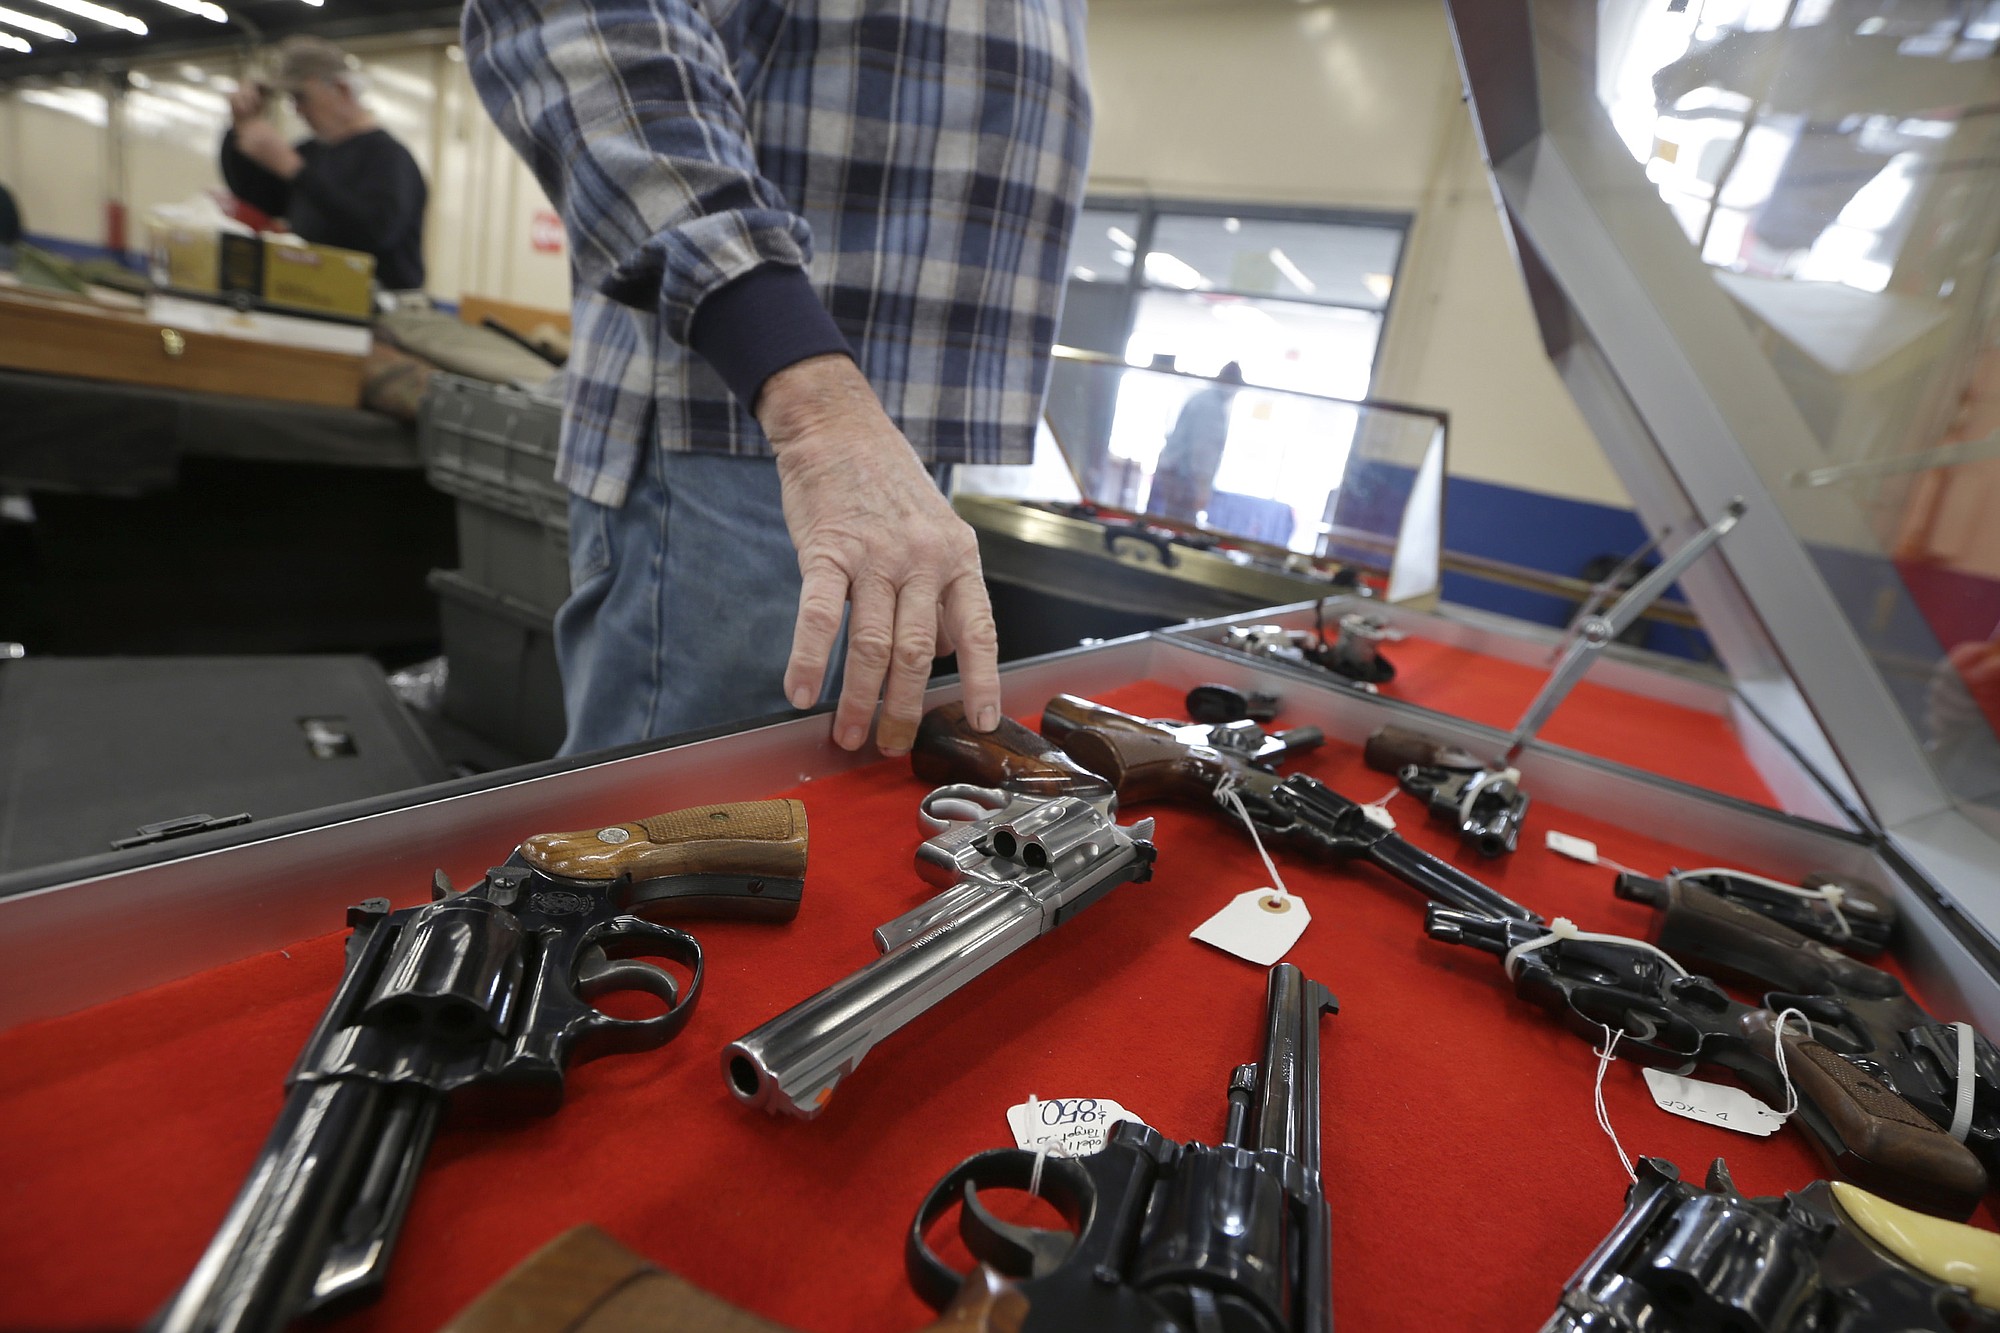 A dealer arranges handguns in a display case in advance of a show last month at the Arkansas State Fairgrounds in Little Rock, Ark. A major U.S.